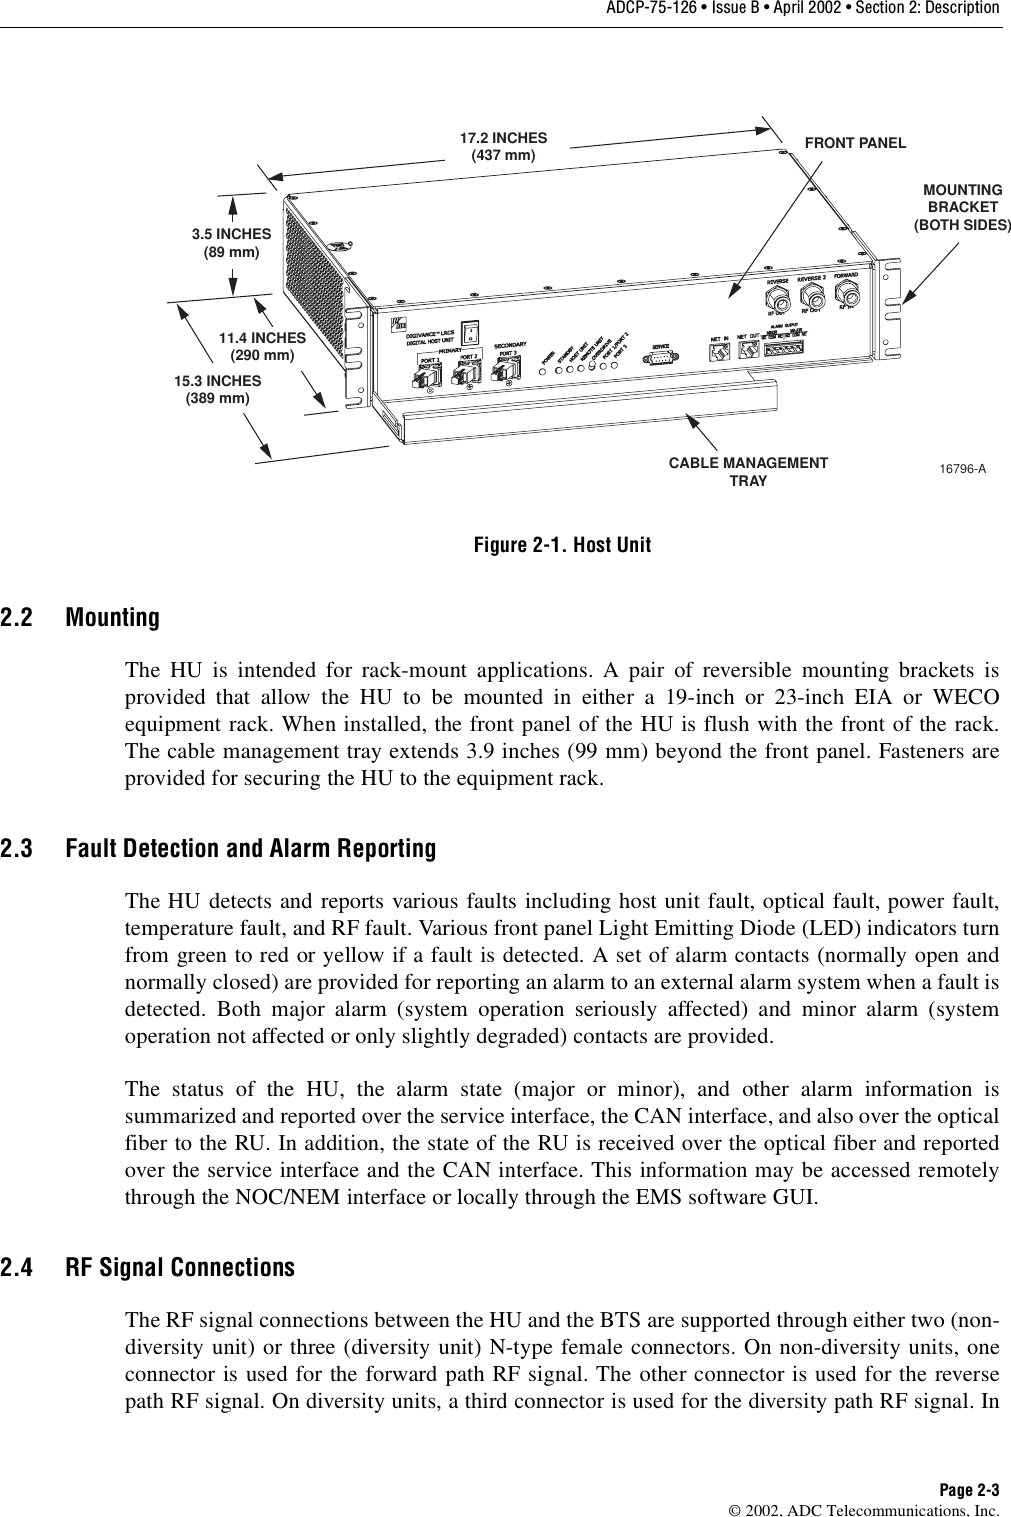 ADCP-75-126 • Issue B • April 2002 • Section 2: DescriptionPage 2-3©2002, ADC Telecommunications, Inc.Figure 2-1. Host Unit2.2 MountingThe HU is intended for rack-mount applications. Apair of reversible mounting brackets isprovided that allow the HU to be mounted in either a19-inch or 23-inch EIA or WECOequipment rack. When installed, the front panel of the HU is flush with the front of the rack.The cable management tray extends 3.9 inches (99 mm) beyond the front panel. Fasteners areprovided for securing the HU to the equipment rack.2.3 Fault Detection and Alarm ReportingThe HU detects and reports various faults including host unit fault, optical fault, power fault,temperature fault, and RF fault. Various front panel Light Emitting Diode (LED) indicators turnfrom green to red or yellow if afault is detected. Aset of alarm contacts (normally open andnormally closed) are provided for reporting an alarm to an external alarm system when afault isdetected. Both major alarm (system operation seriously affected) and minor alarm (systemoperation not affected or only slightly degraded) contacts are provided.The status of the HU, the alarm state (major or minor), and other alarm information issummarized and reported over the service interface, the CAN interface, and also over the opticalfiber to the RU. In addition, the state of the RU is received over the optical fiber and reportedover the service interface and the CAN interface. This information may be accessed remotelythrough the NOC/NEM interface or locally through the EMS software GUI.2.4 RF Signal ConnectionsThe RF signal connections between the HU and the BTS are supported through either two (non-diversity unit) or three (diversity unit) N-type female connectors. On non-diversity units, oneconnector is used for the forward path RF signal. The other connector is used for the reversepath RF signal. On diversity units, athird connector is used for the diversity path RF signal. In17.2 INCHES(437 mm)3.5 INCHES(89 mm)11.4 INCHES(290 mm)15.3 INCHES(389 mm)FRONT PANELCABLE MANAGEMENTTRAYMOUNTINGBRACKET(BOTH SIDES)16796-A